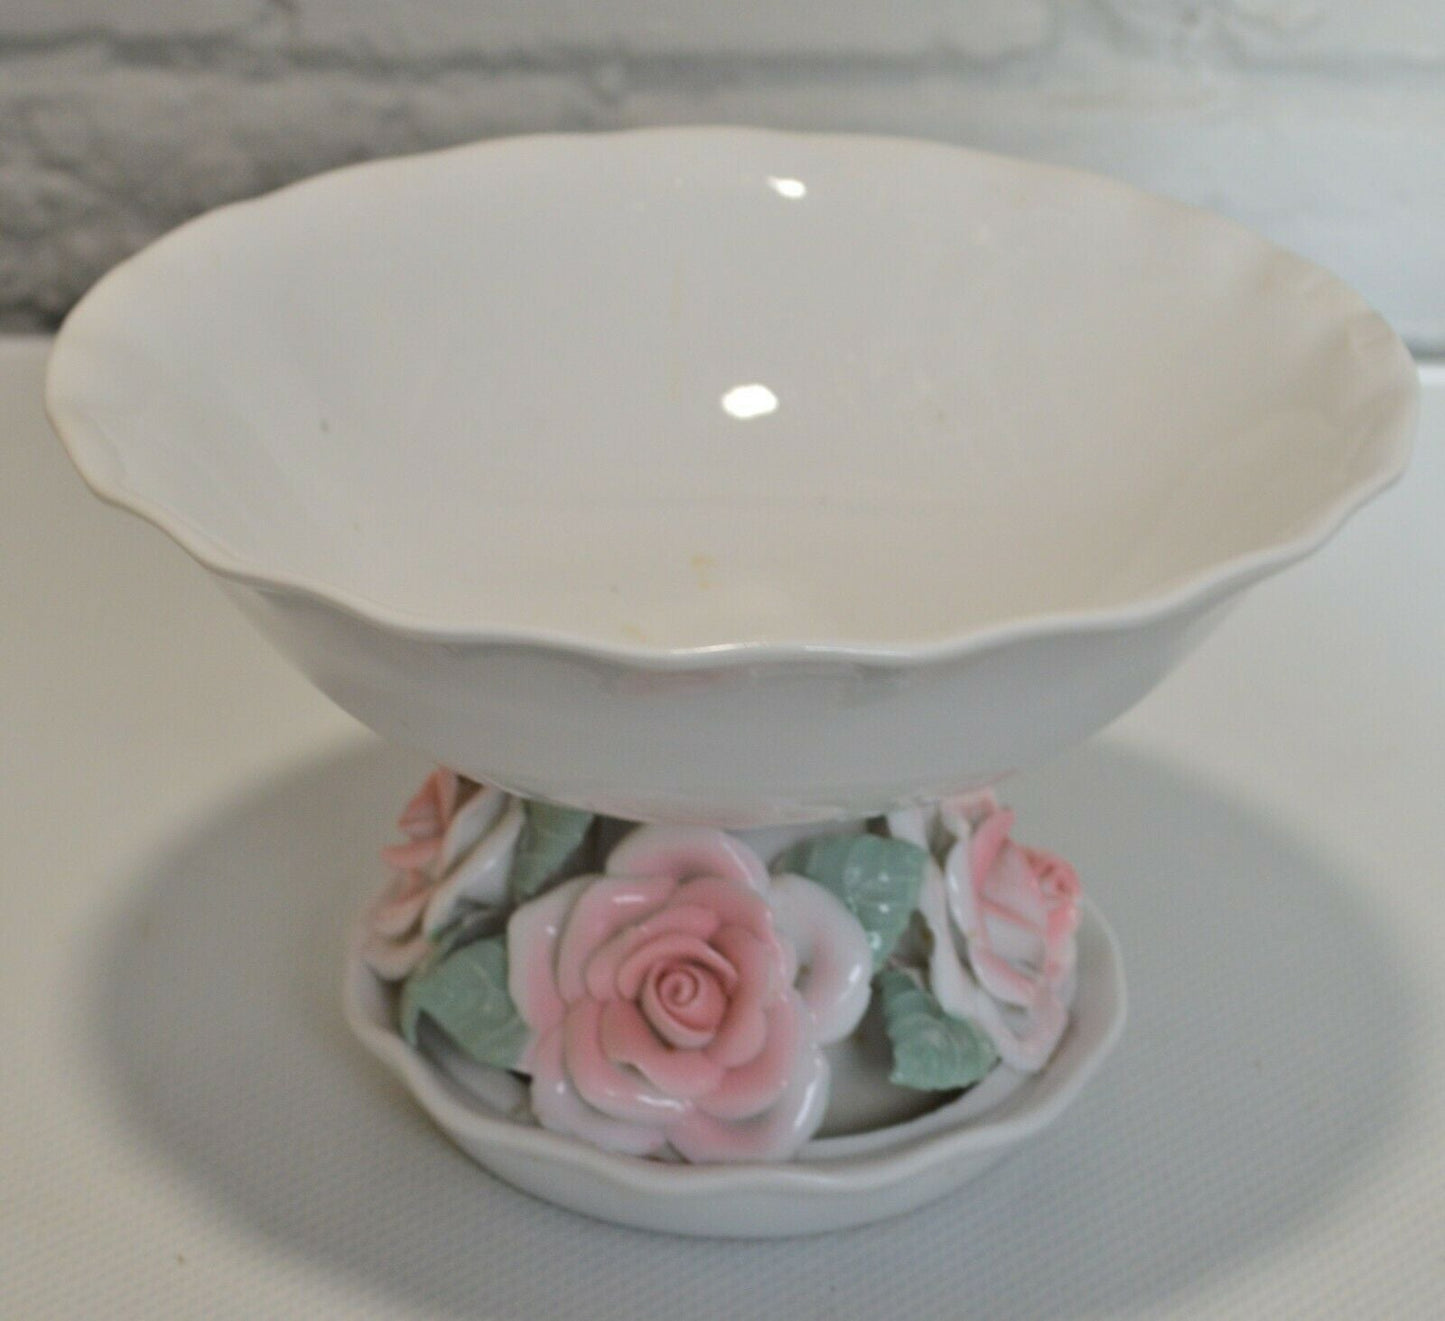 TABLEWARE FOUR DECORATIVE ITEMS WITH PINK ROSES BASKETS BOWL & VASE( PREVIOUSLY OWNED) GOOD CONDITION - TMD167207